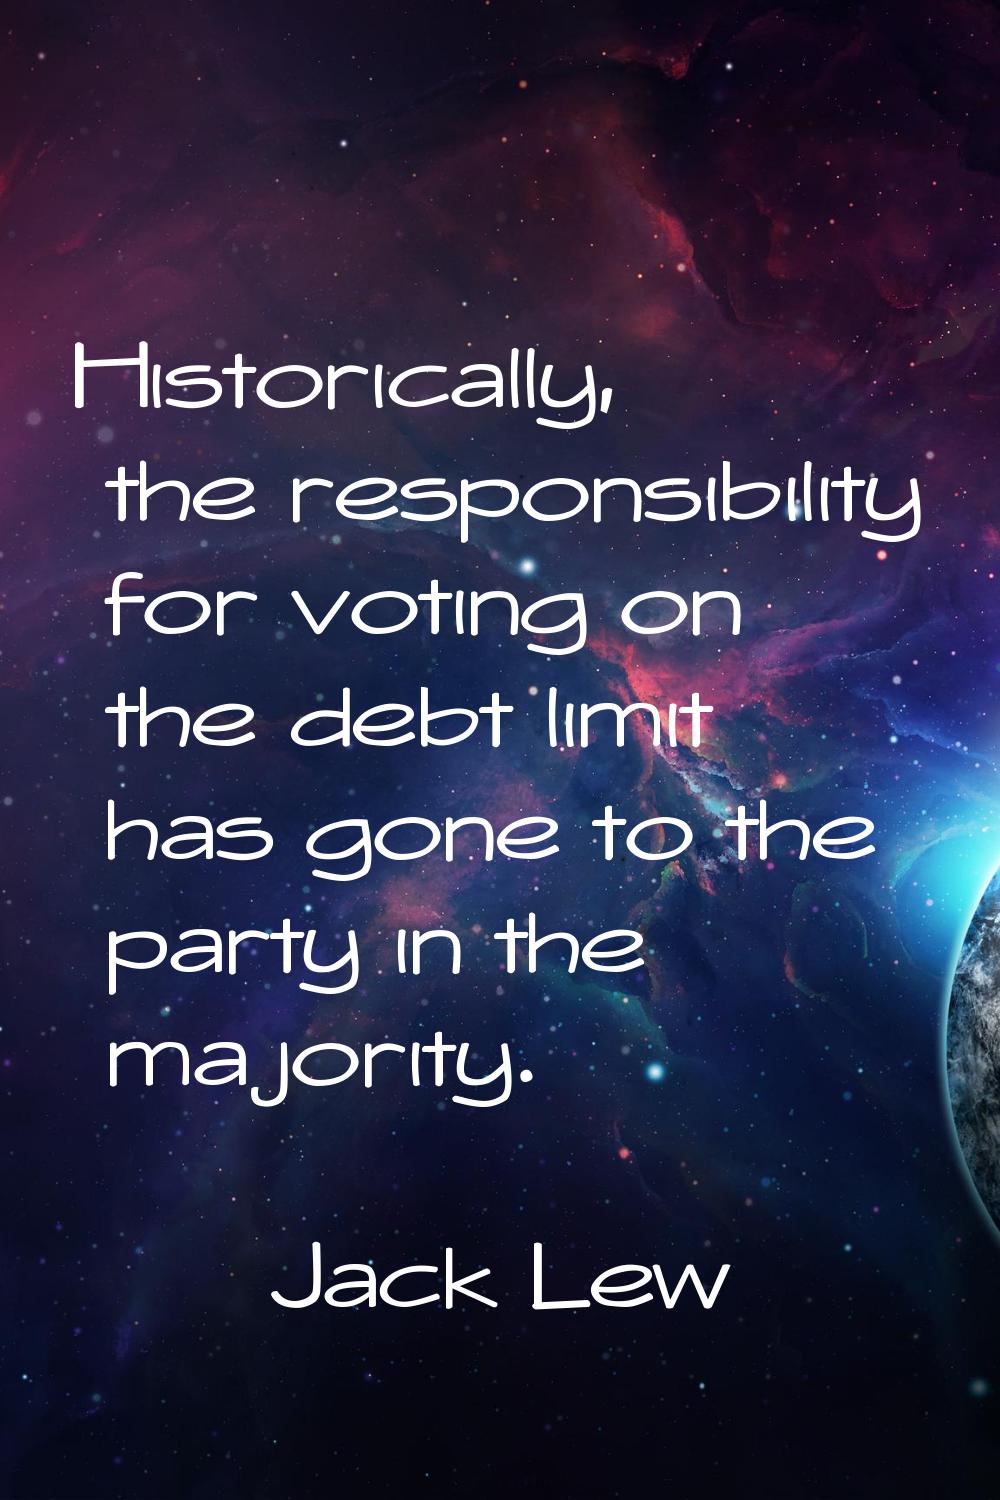 Historically, the responsibility for voting on the debt limit has gone to the party in the majority